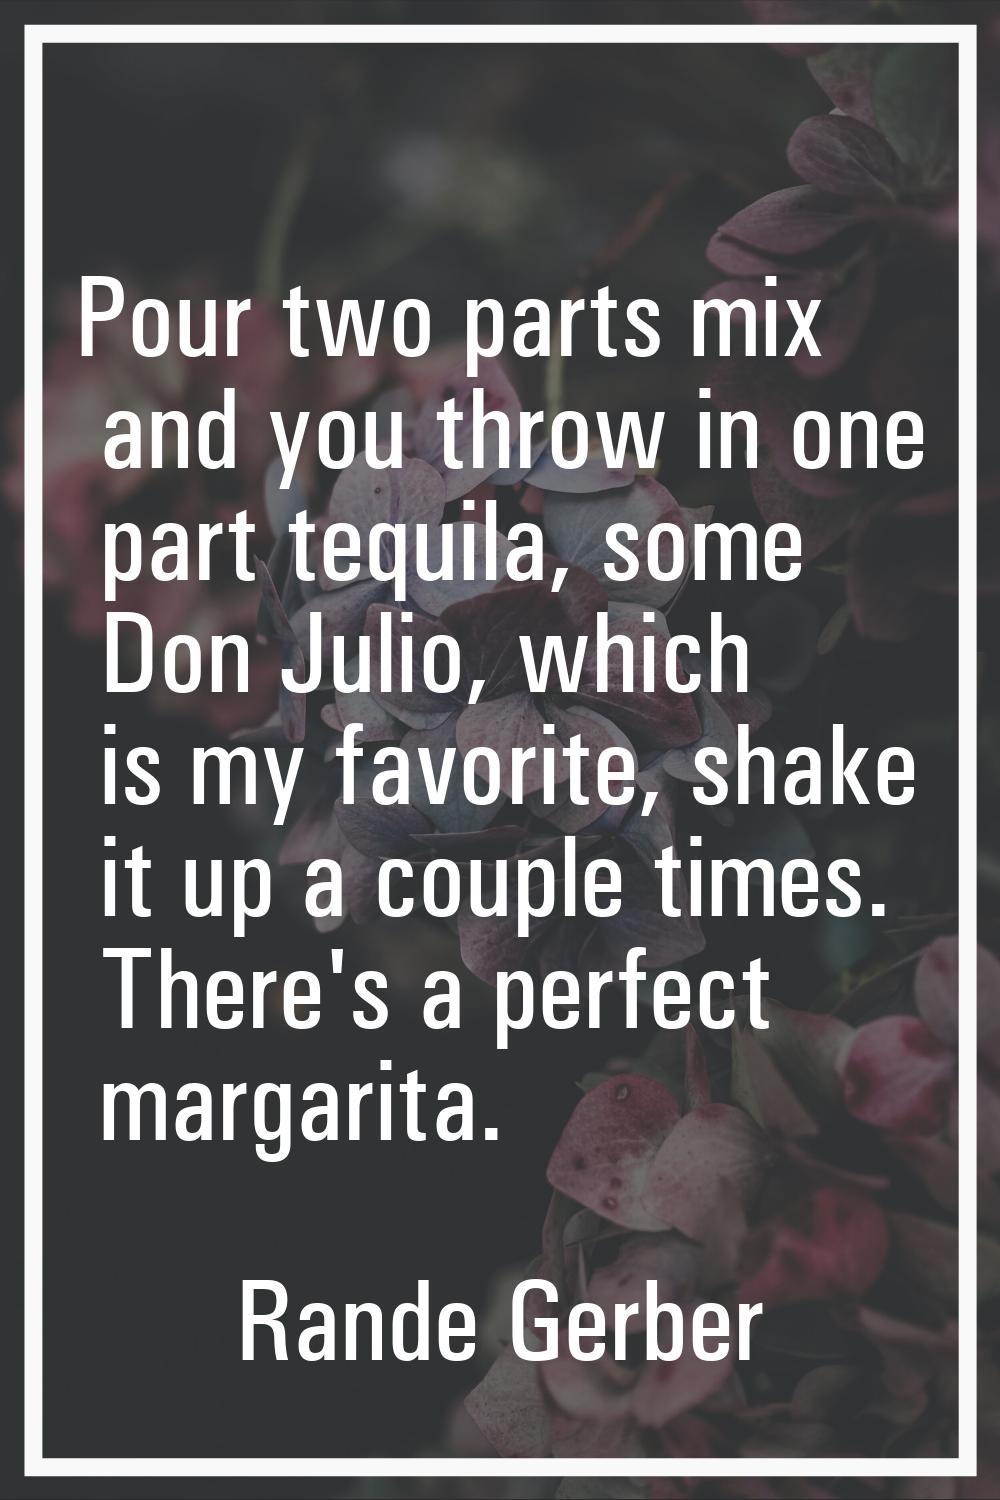 Pour two parts mix and you throw in one part tequila, some Don Julio, which is my favorite, shake i